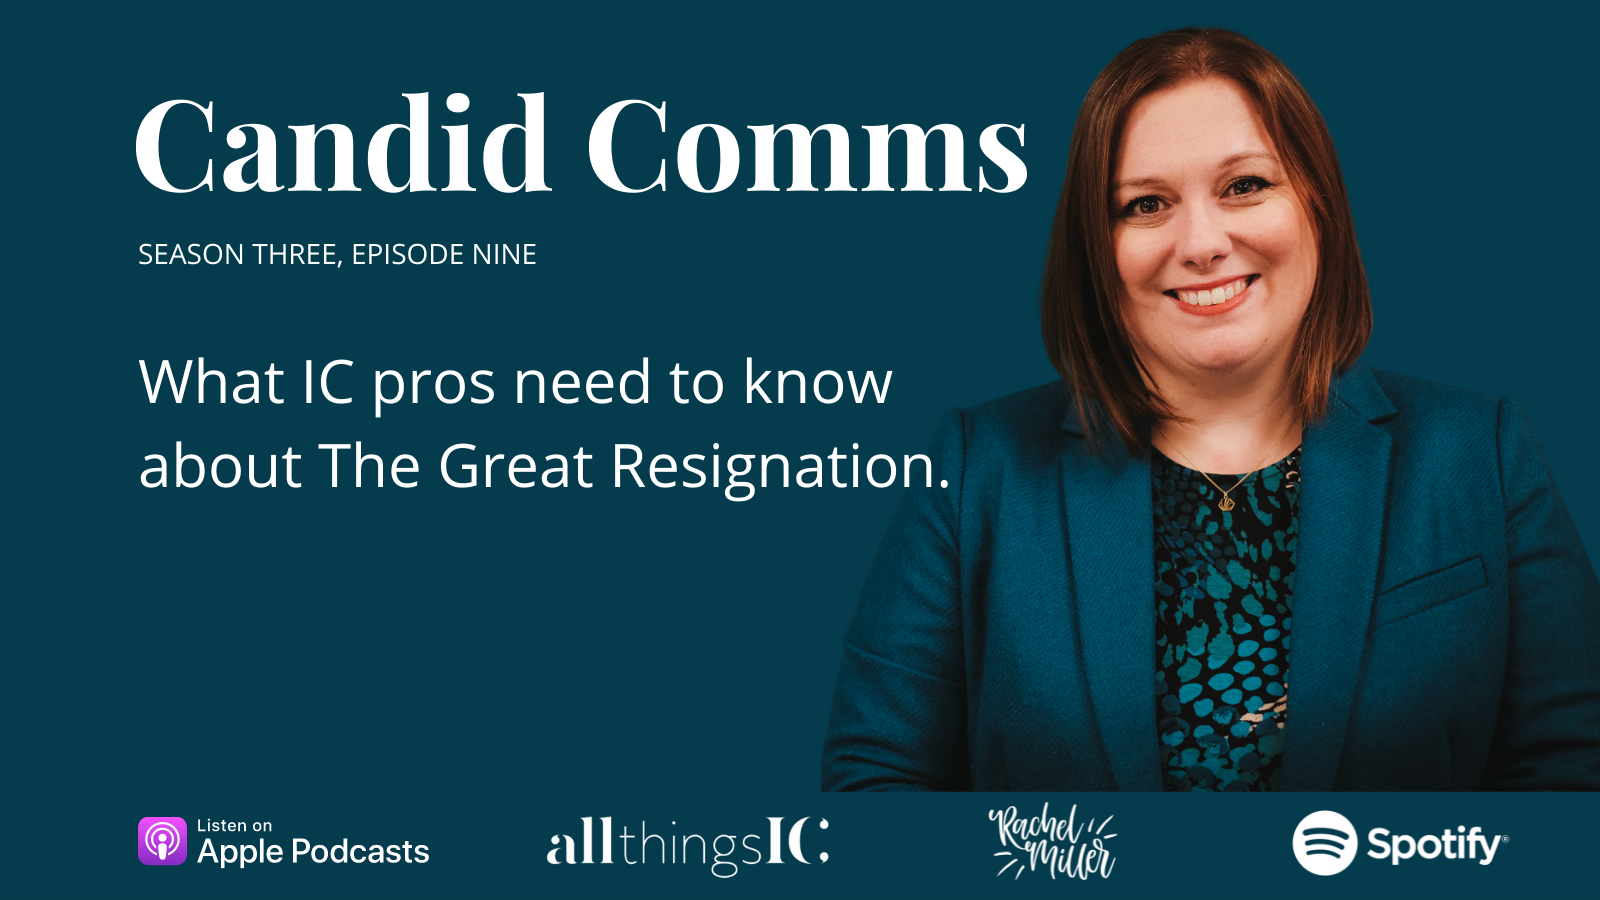 Candid Comms: What IC pros need to know about The Great Resignation